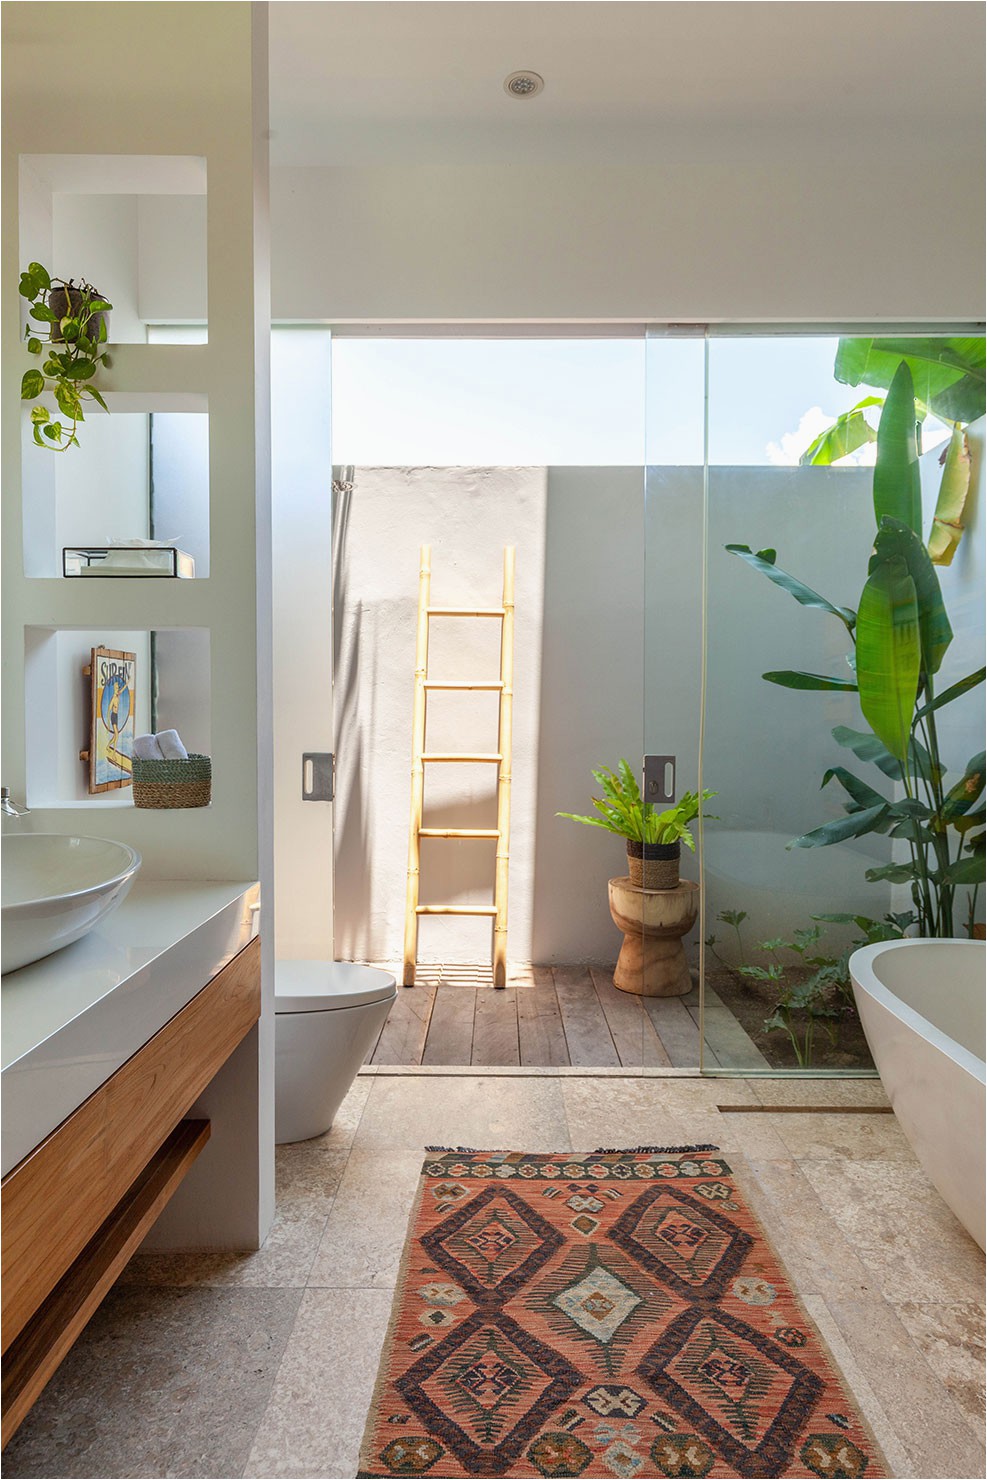 Modern Bathroom Rugs and towels E Rug at A Time